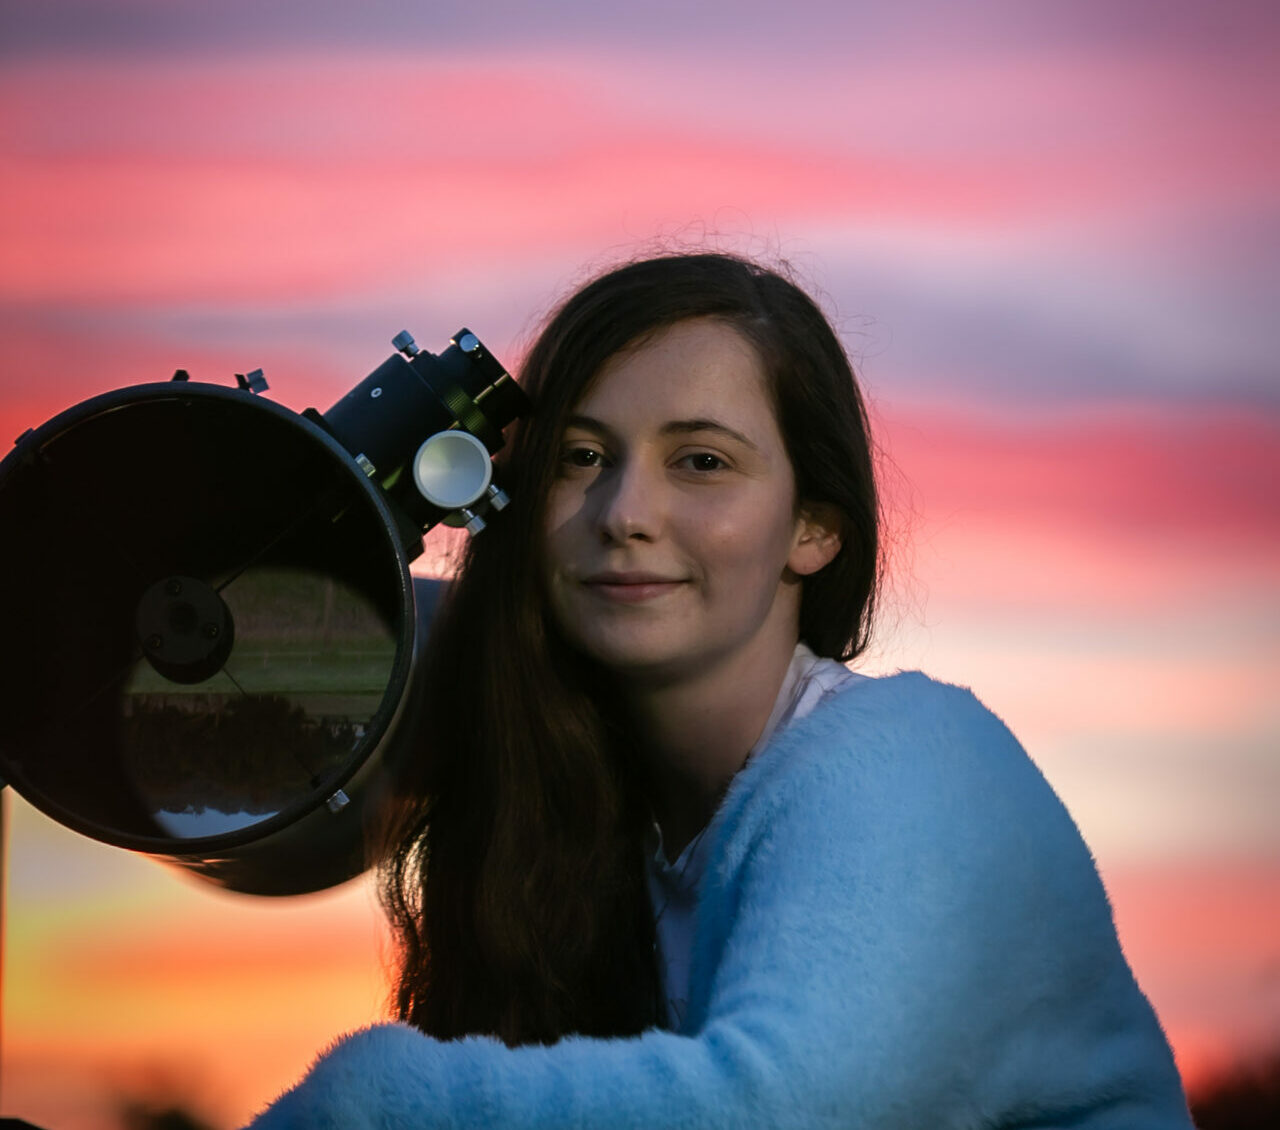 A young woman with long brown hair sits beside a telescope, the sky behind her is purple and pink